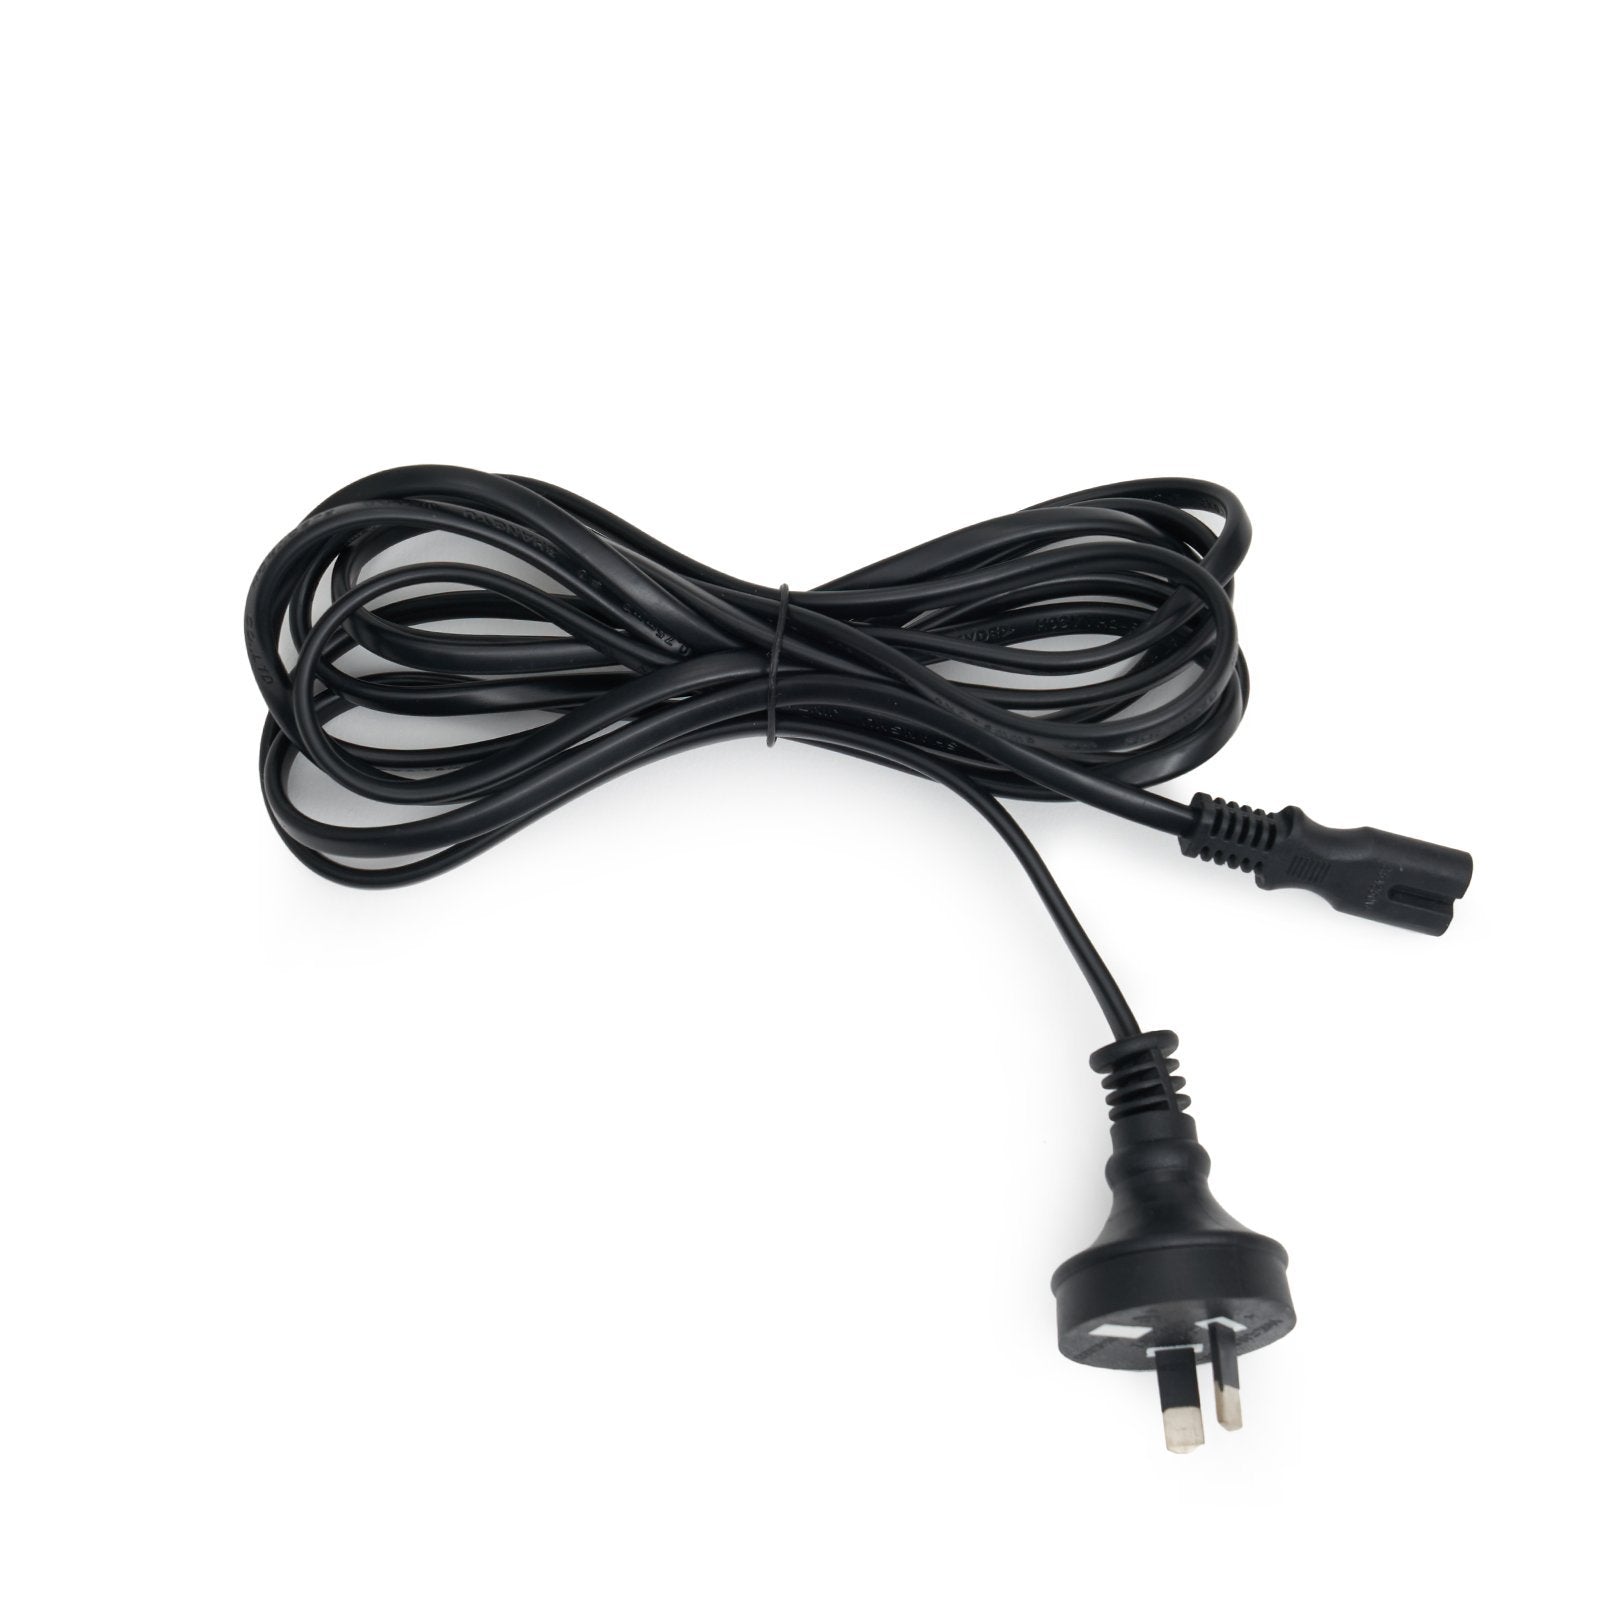 GlowPRO 2 18" Power Cable | Luvo Store